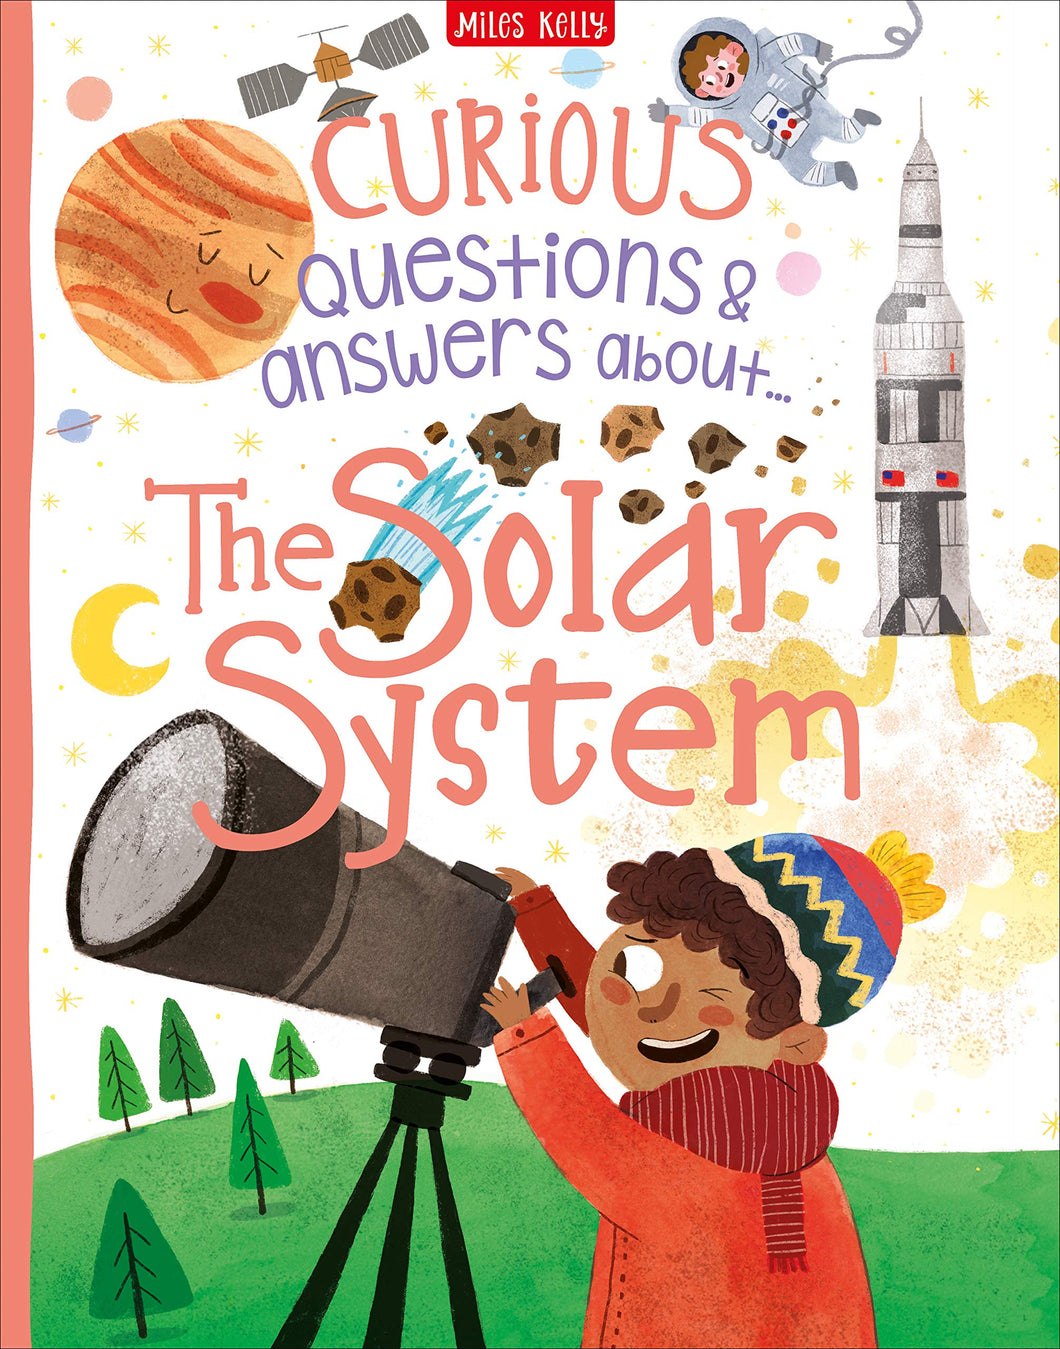 Curious Questions & Answers about The Solar System